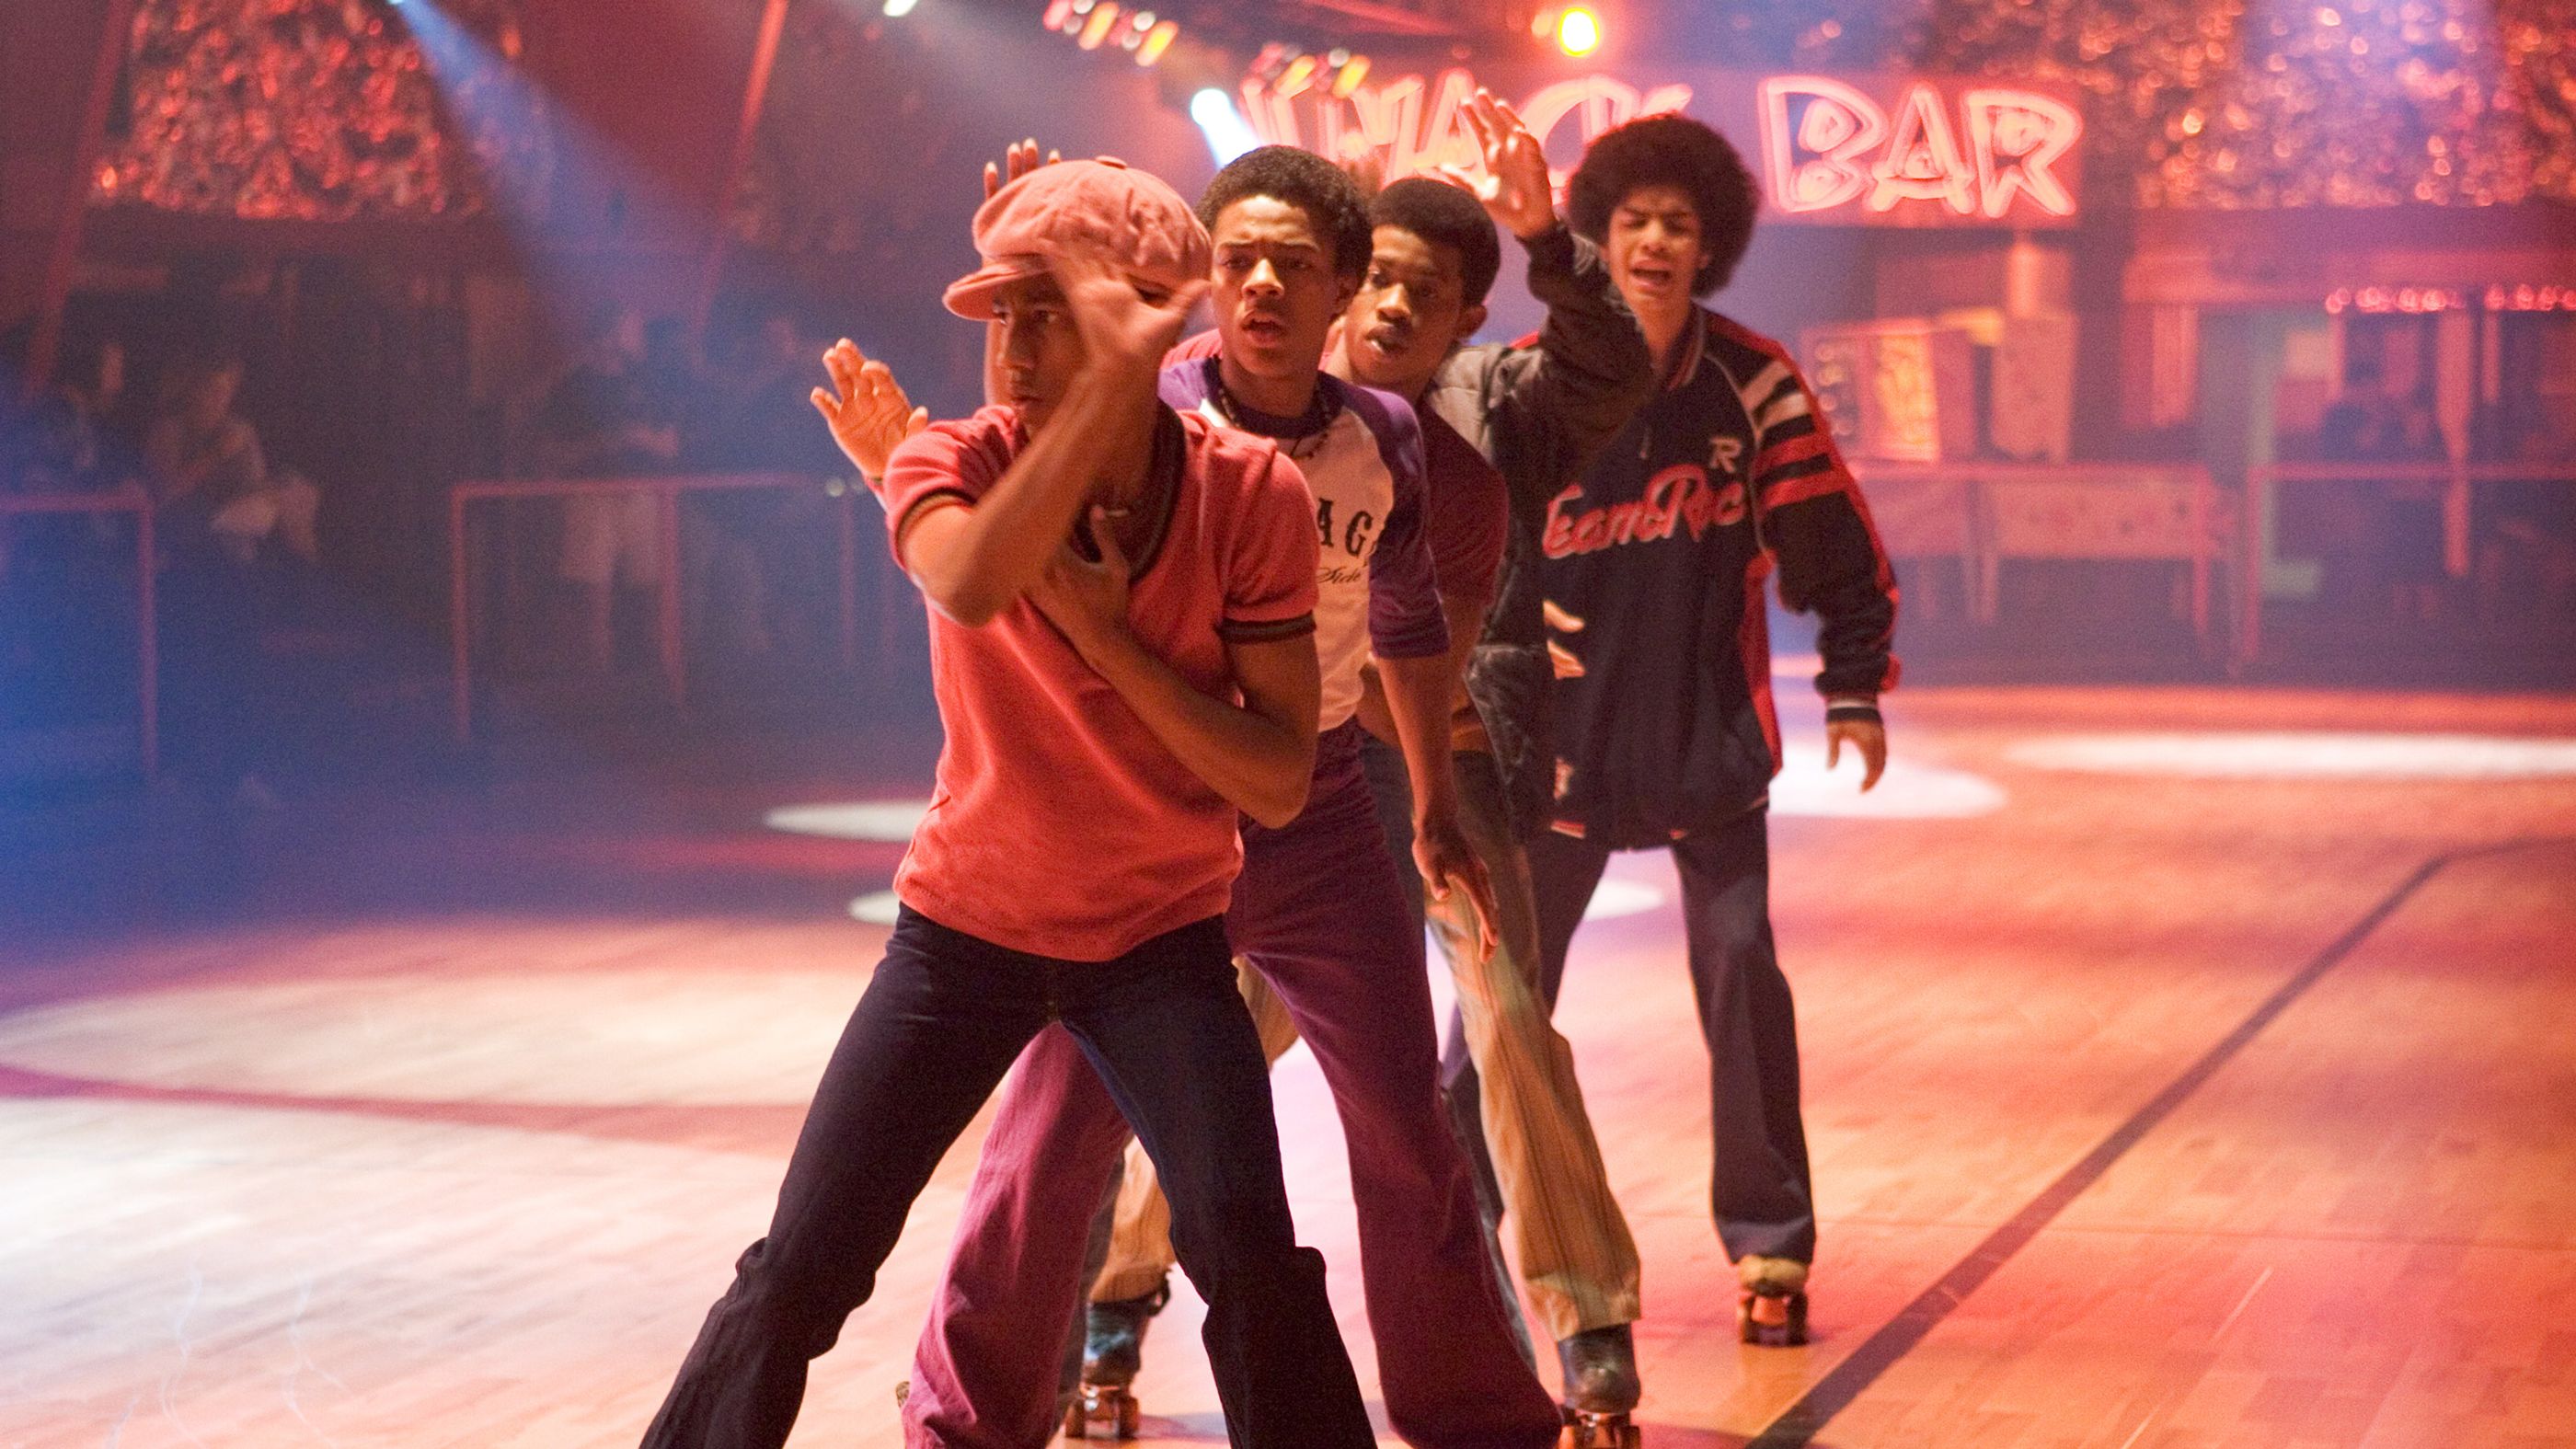 Roll Bounce | Full Movie | Movies Anywhere2800 x 1575